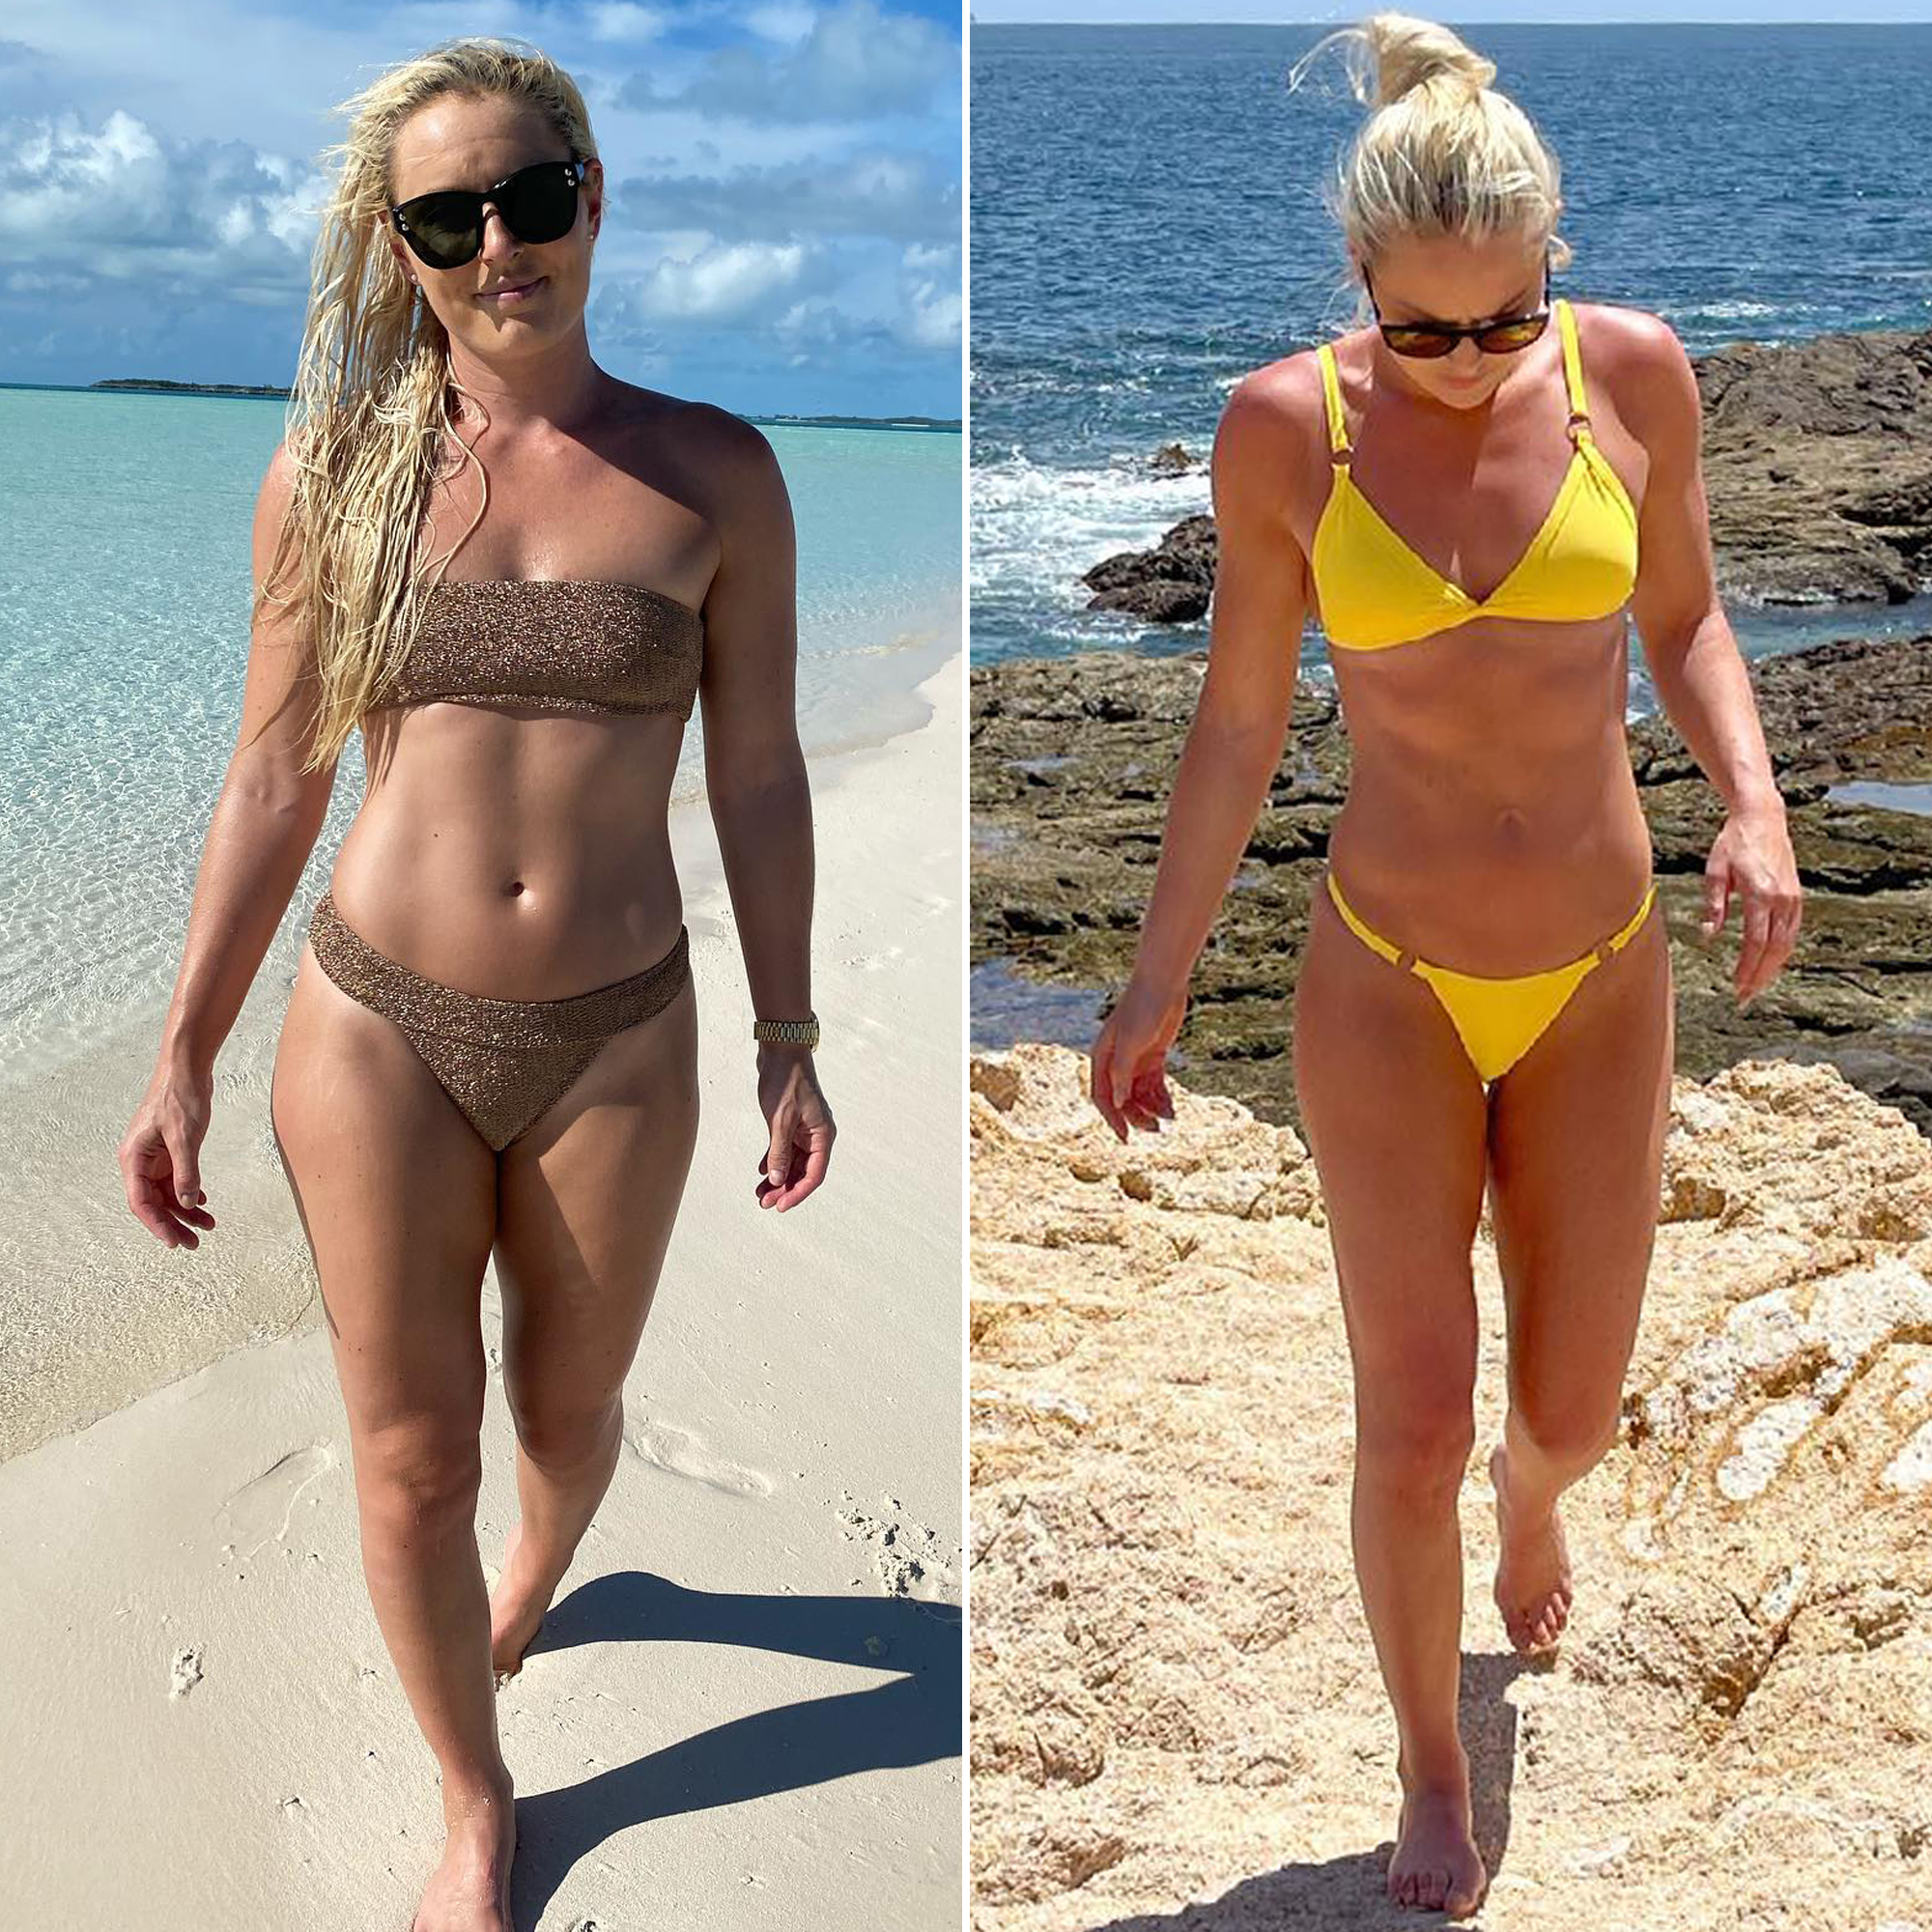 Best Tits Nude Beach - Lindsey Vonn's Bikini Photos: See Her Sexiest Swimsuit Pictures